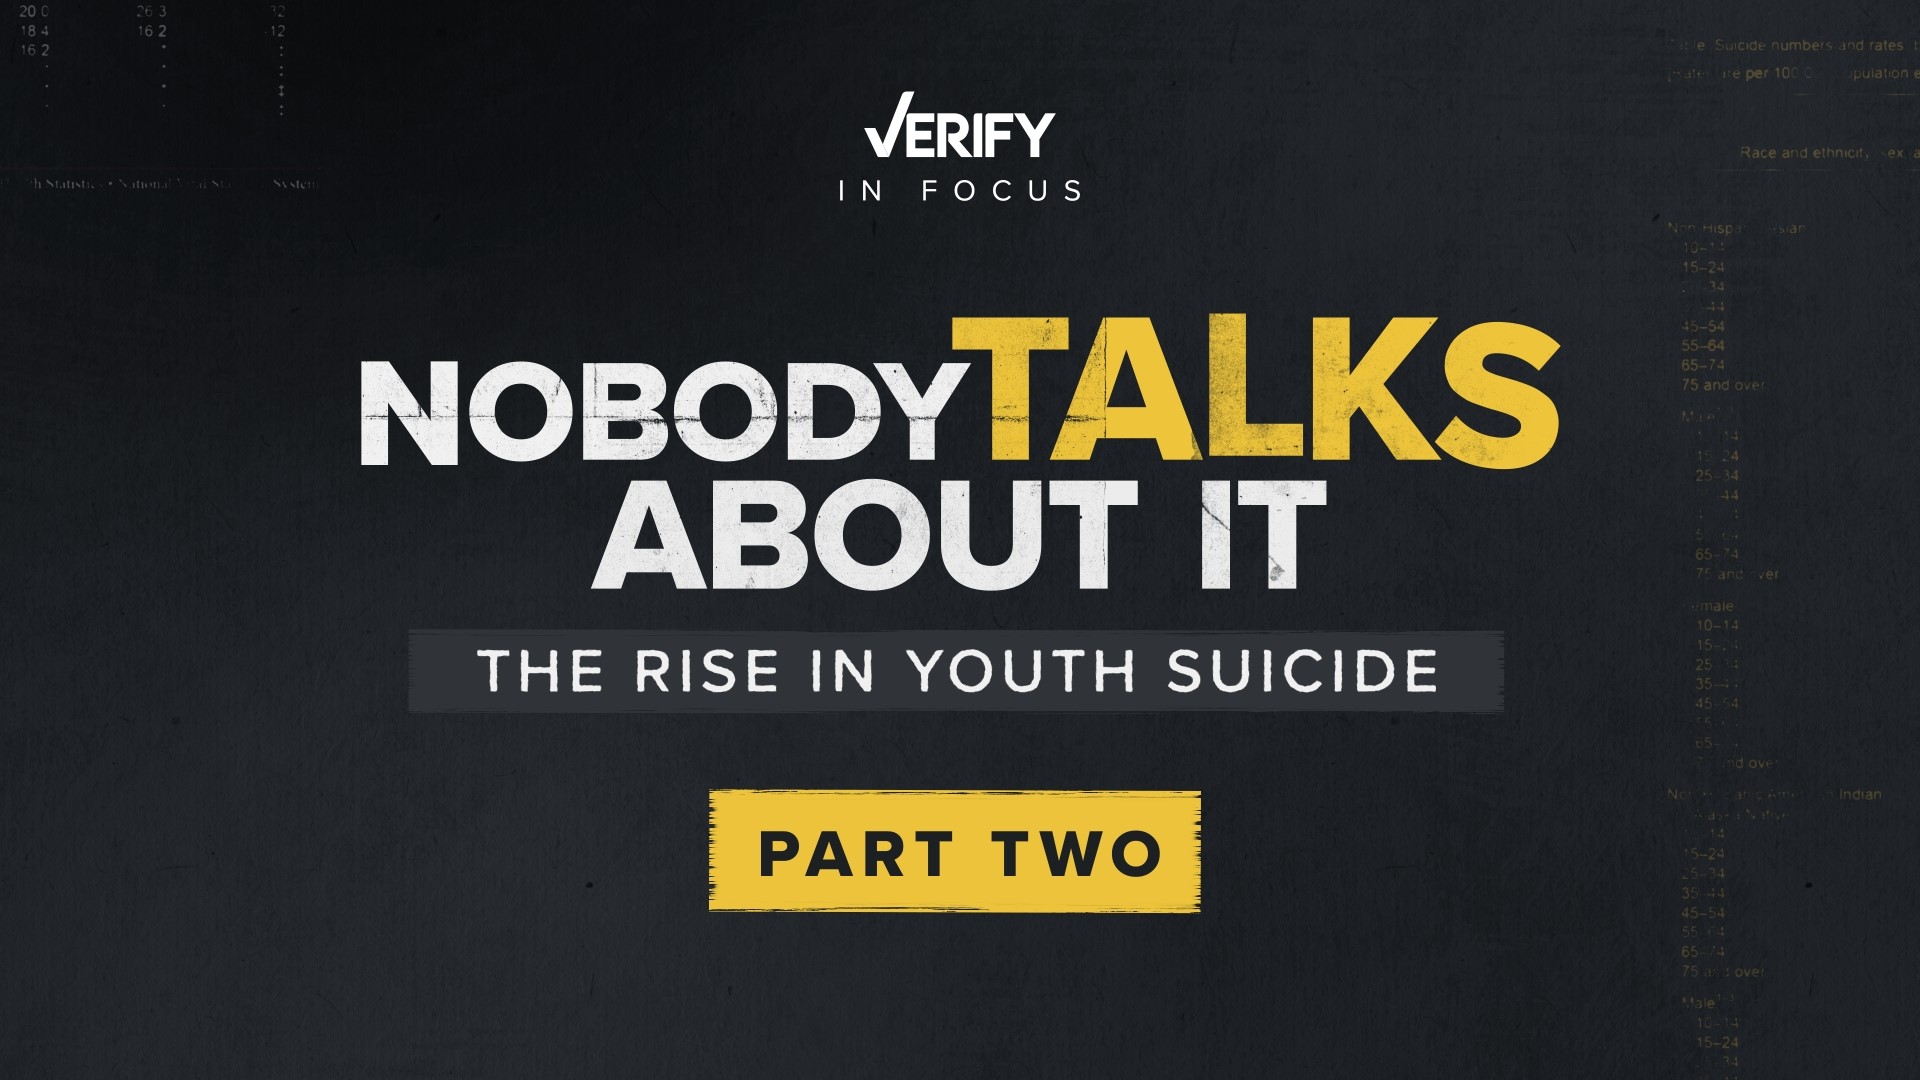 In part two, we speak to youth psychiatrists about the risk factors and warning signs of youth suicide, and the strains on access to youth mental health services.